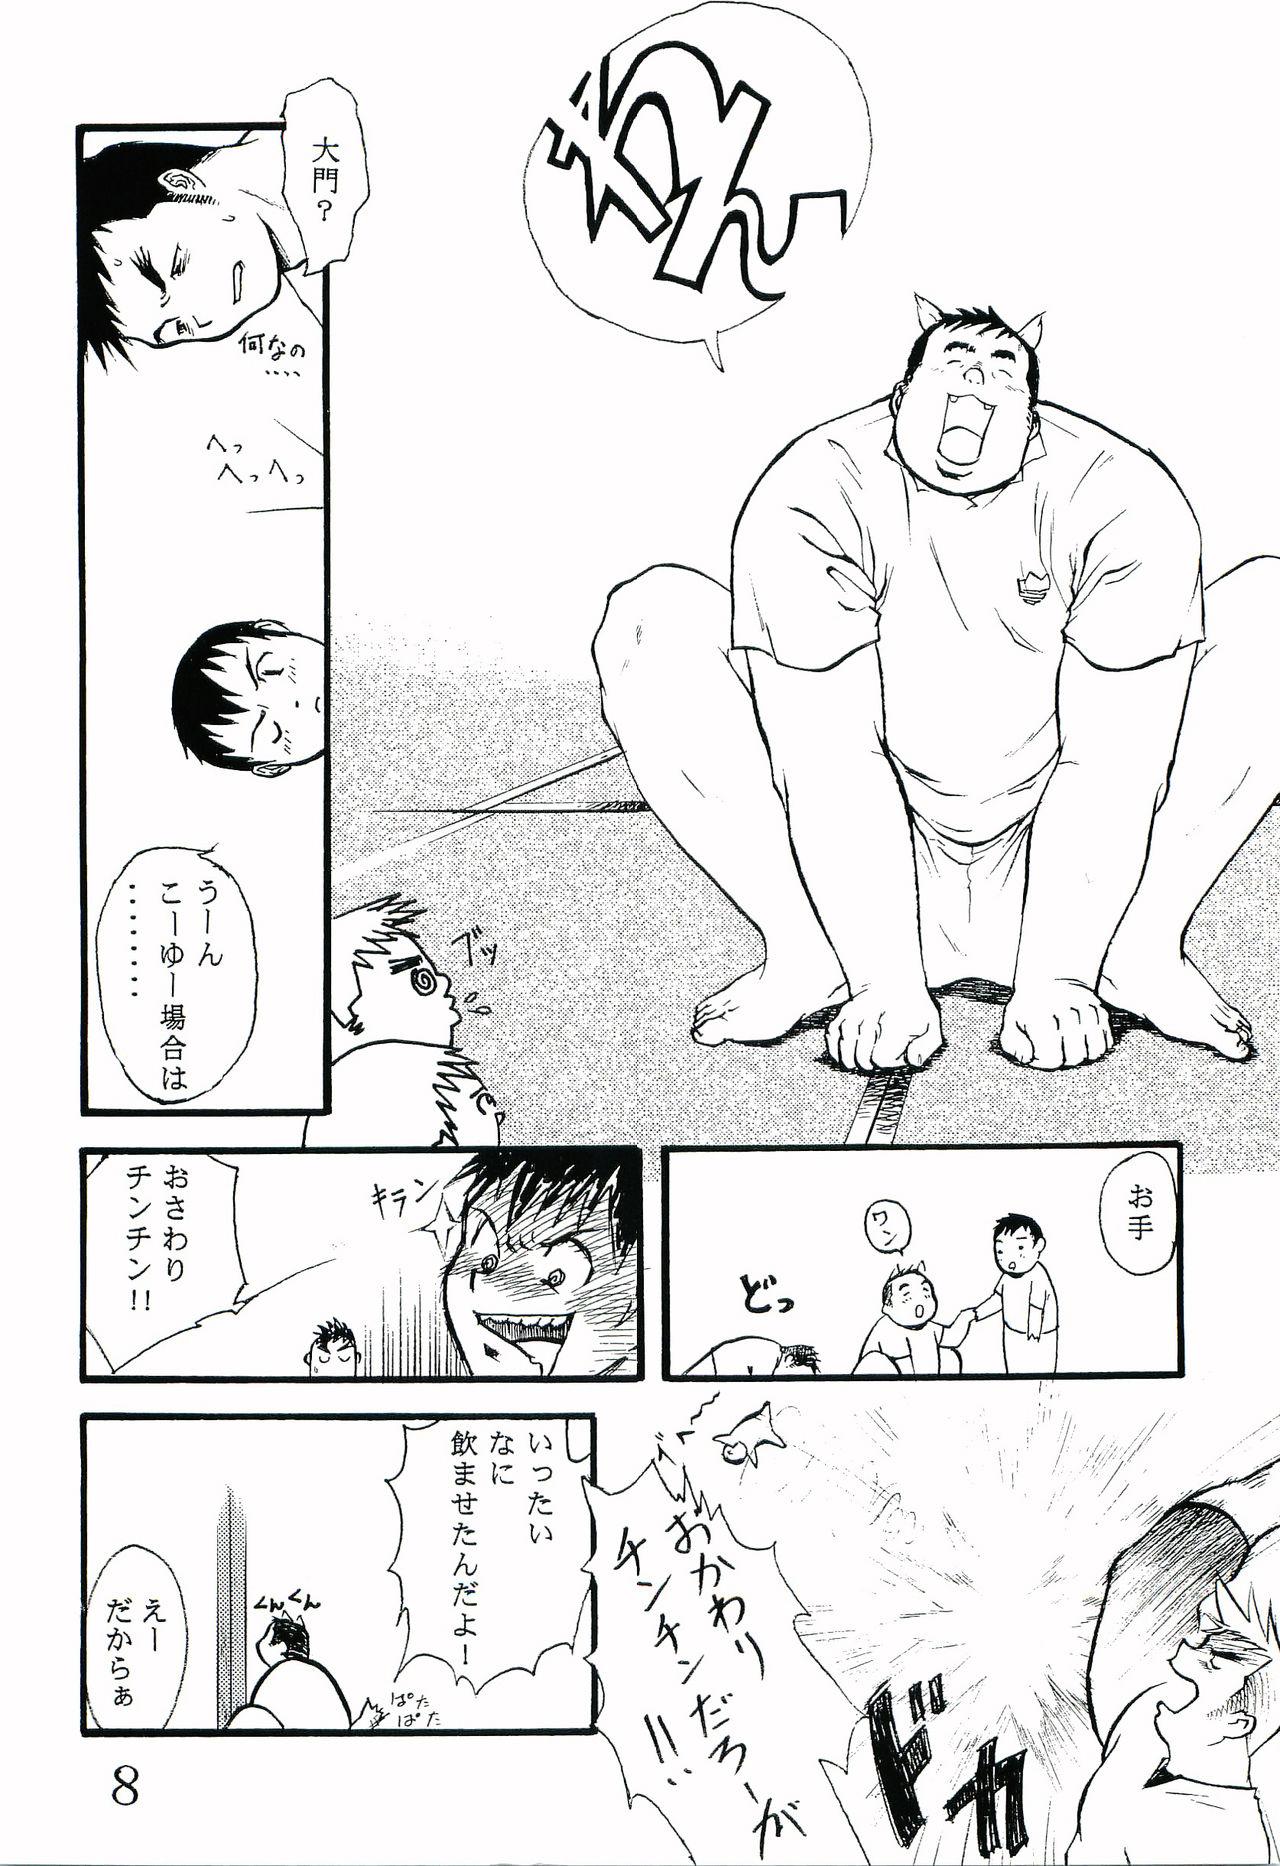 Old Man Dai Inu - King of fighters Egypt - Page 7